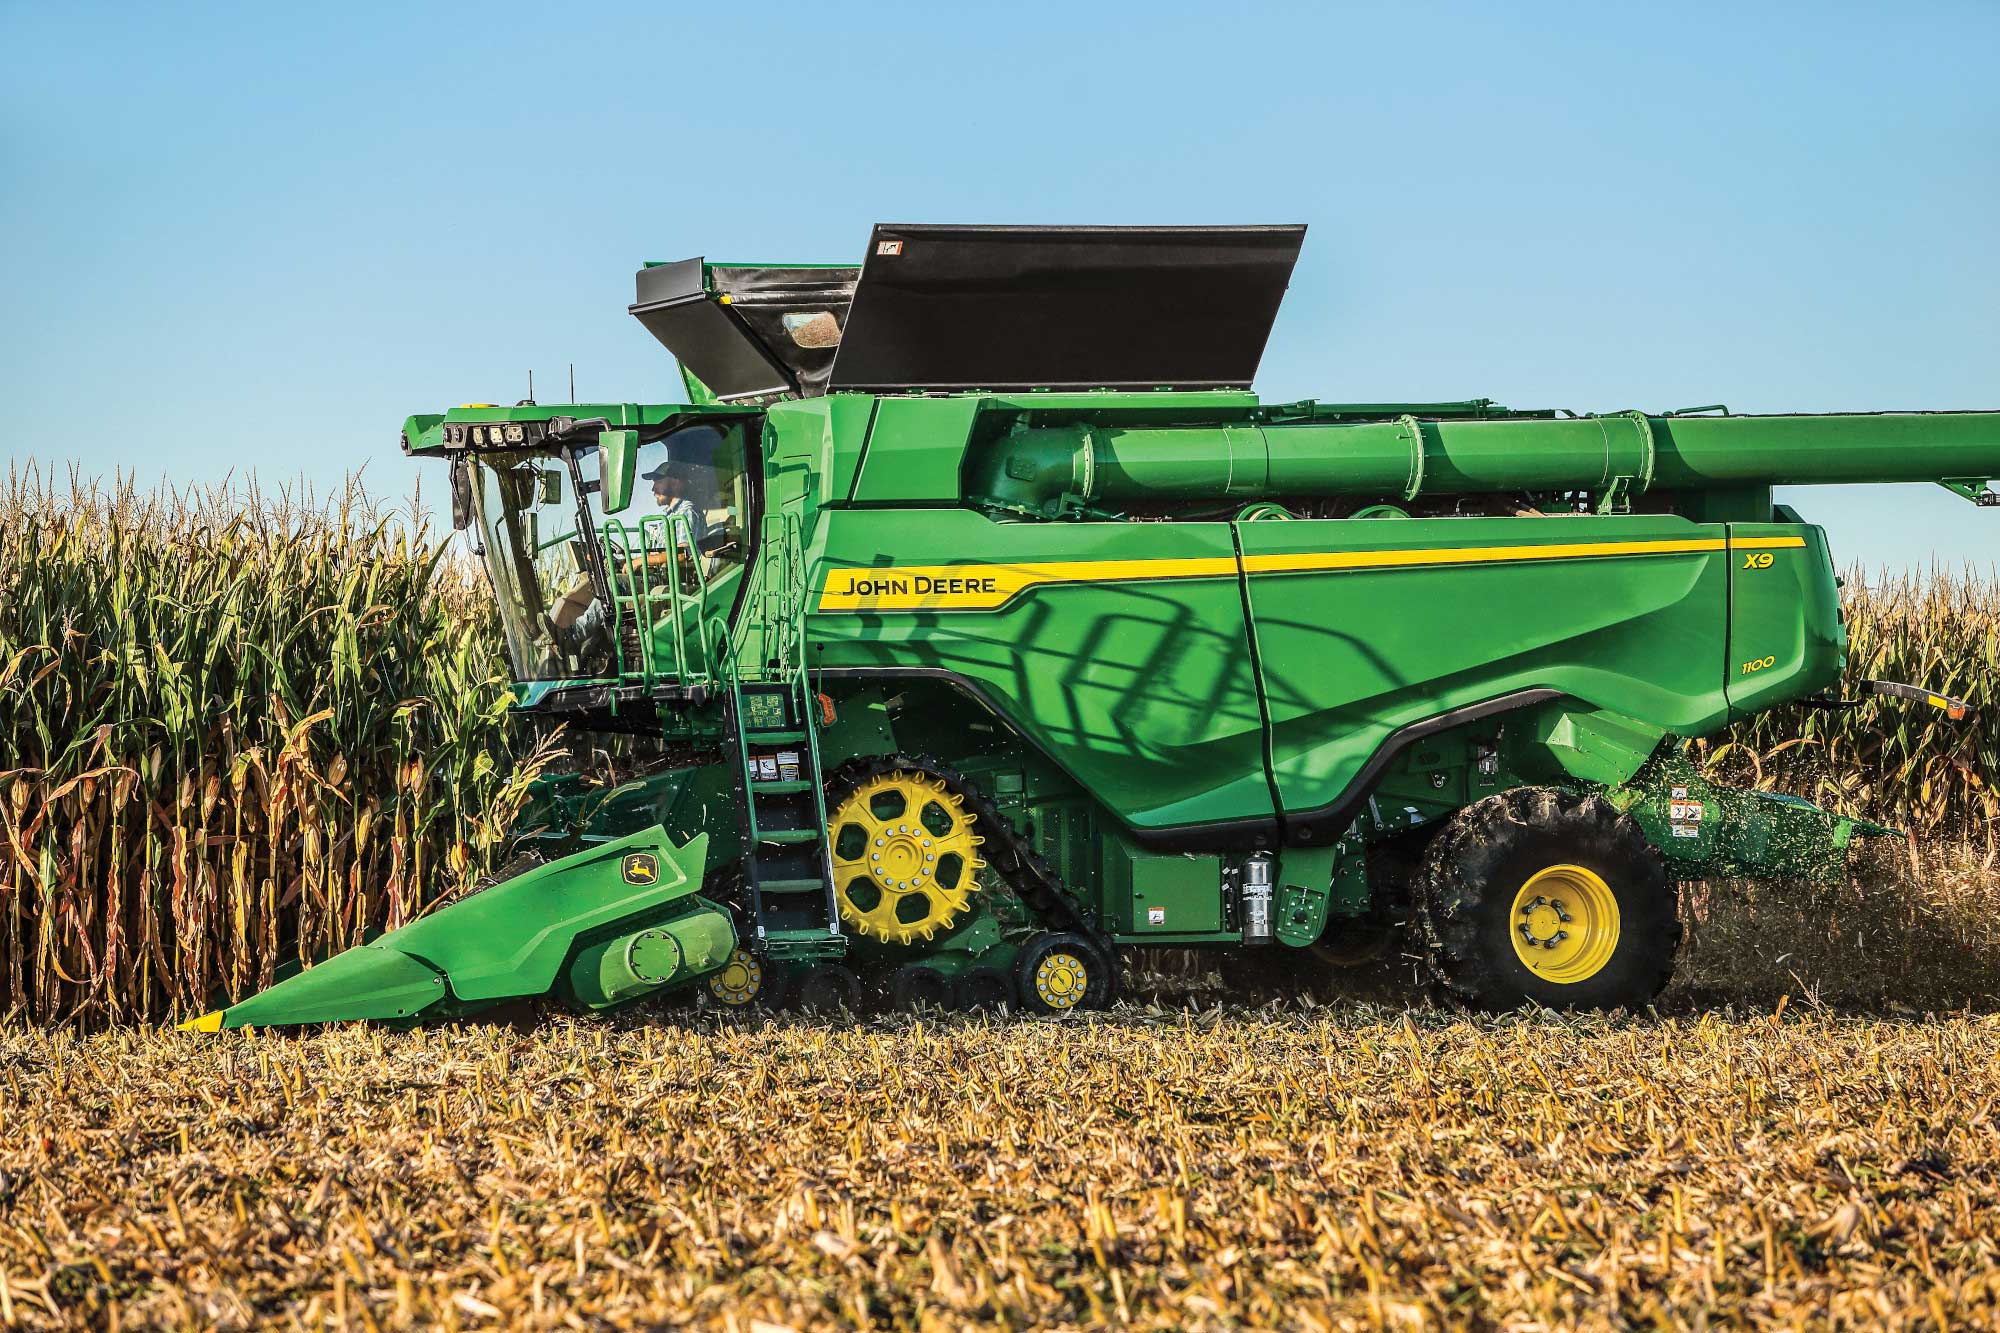 John Deere releases two new models to its X Series Combine AGDAILY